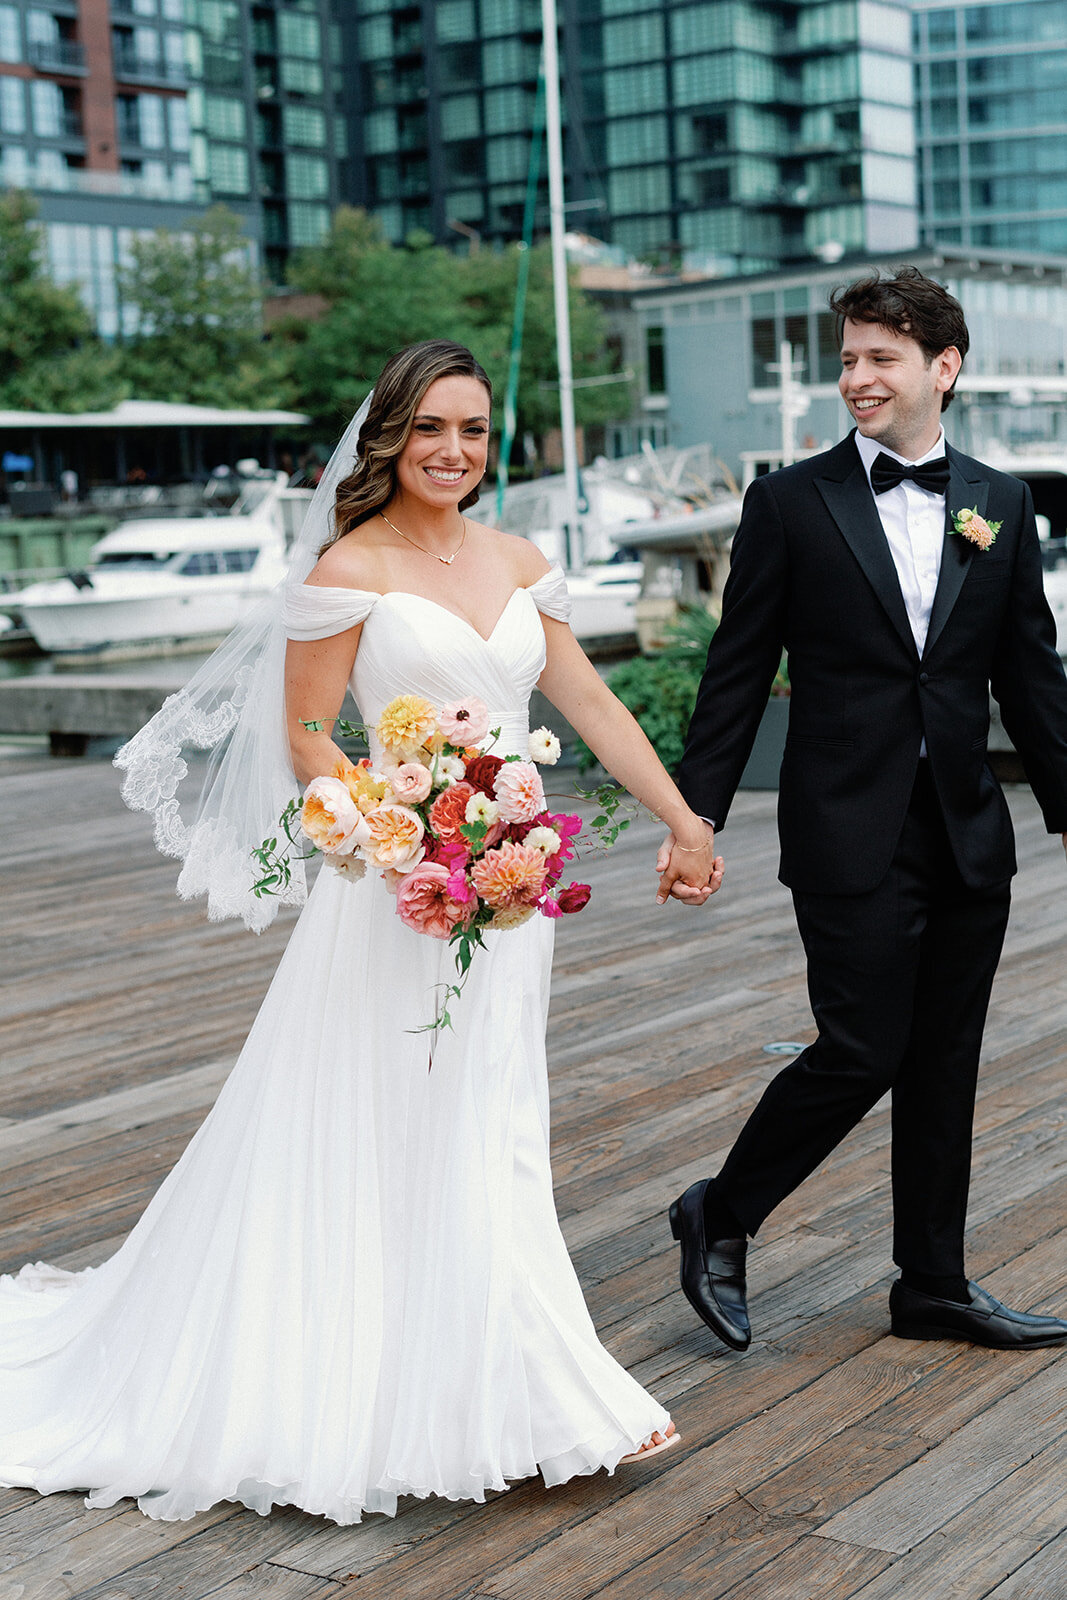 Married couple holding hands while walking and bride holding her floral bouquet while groom looking at her